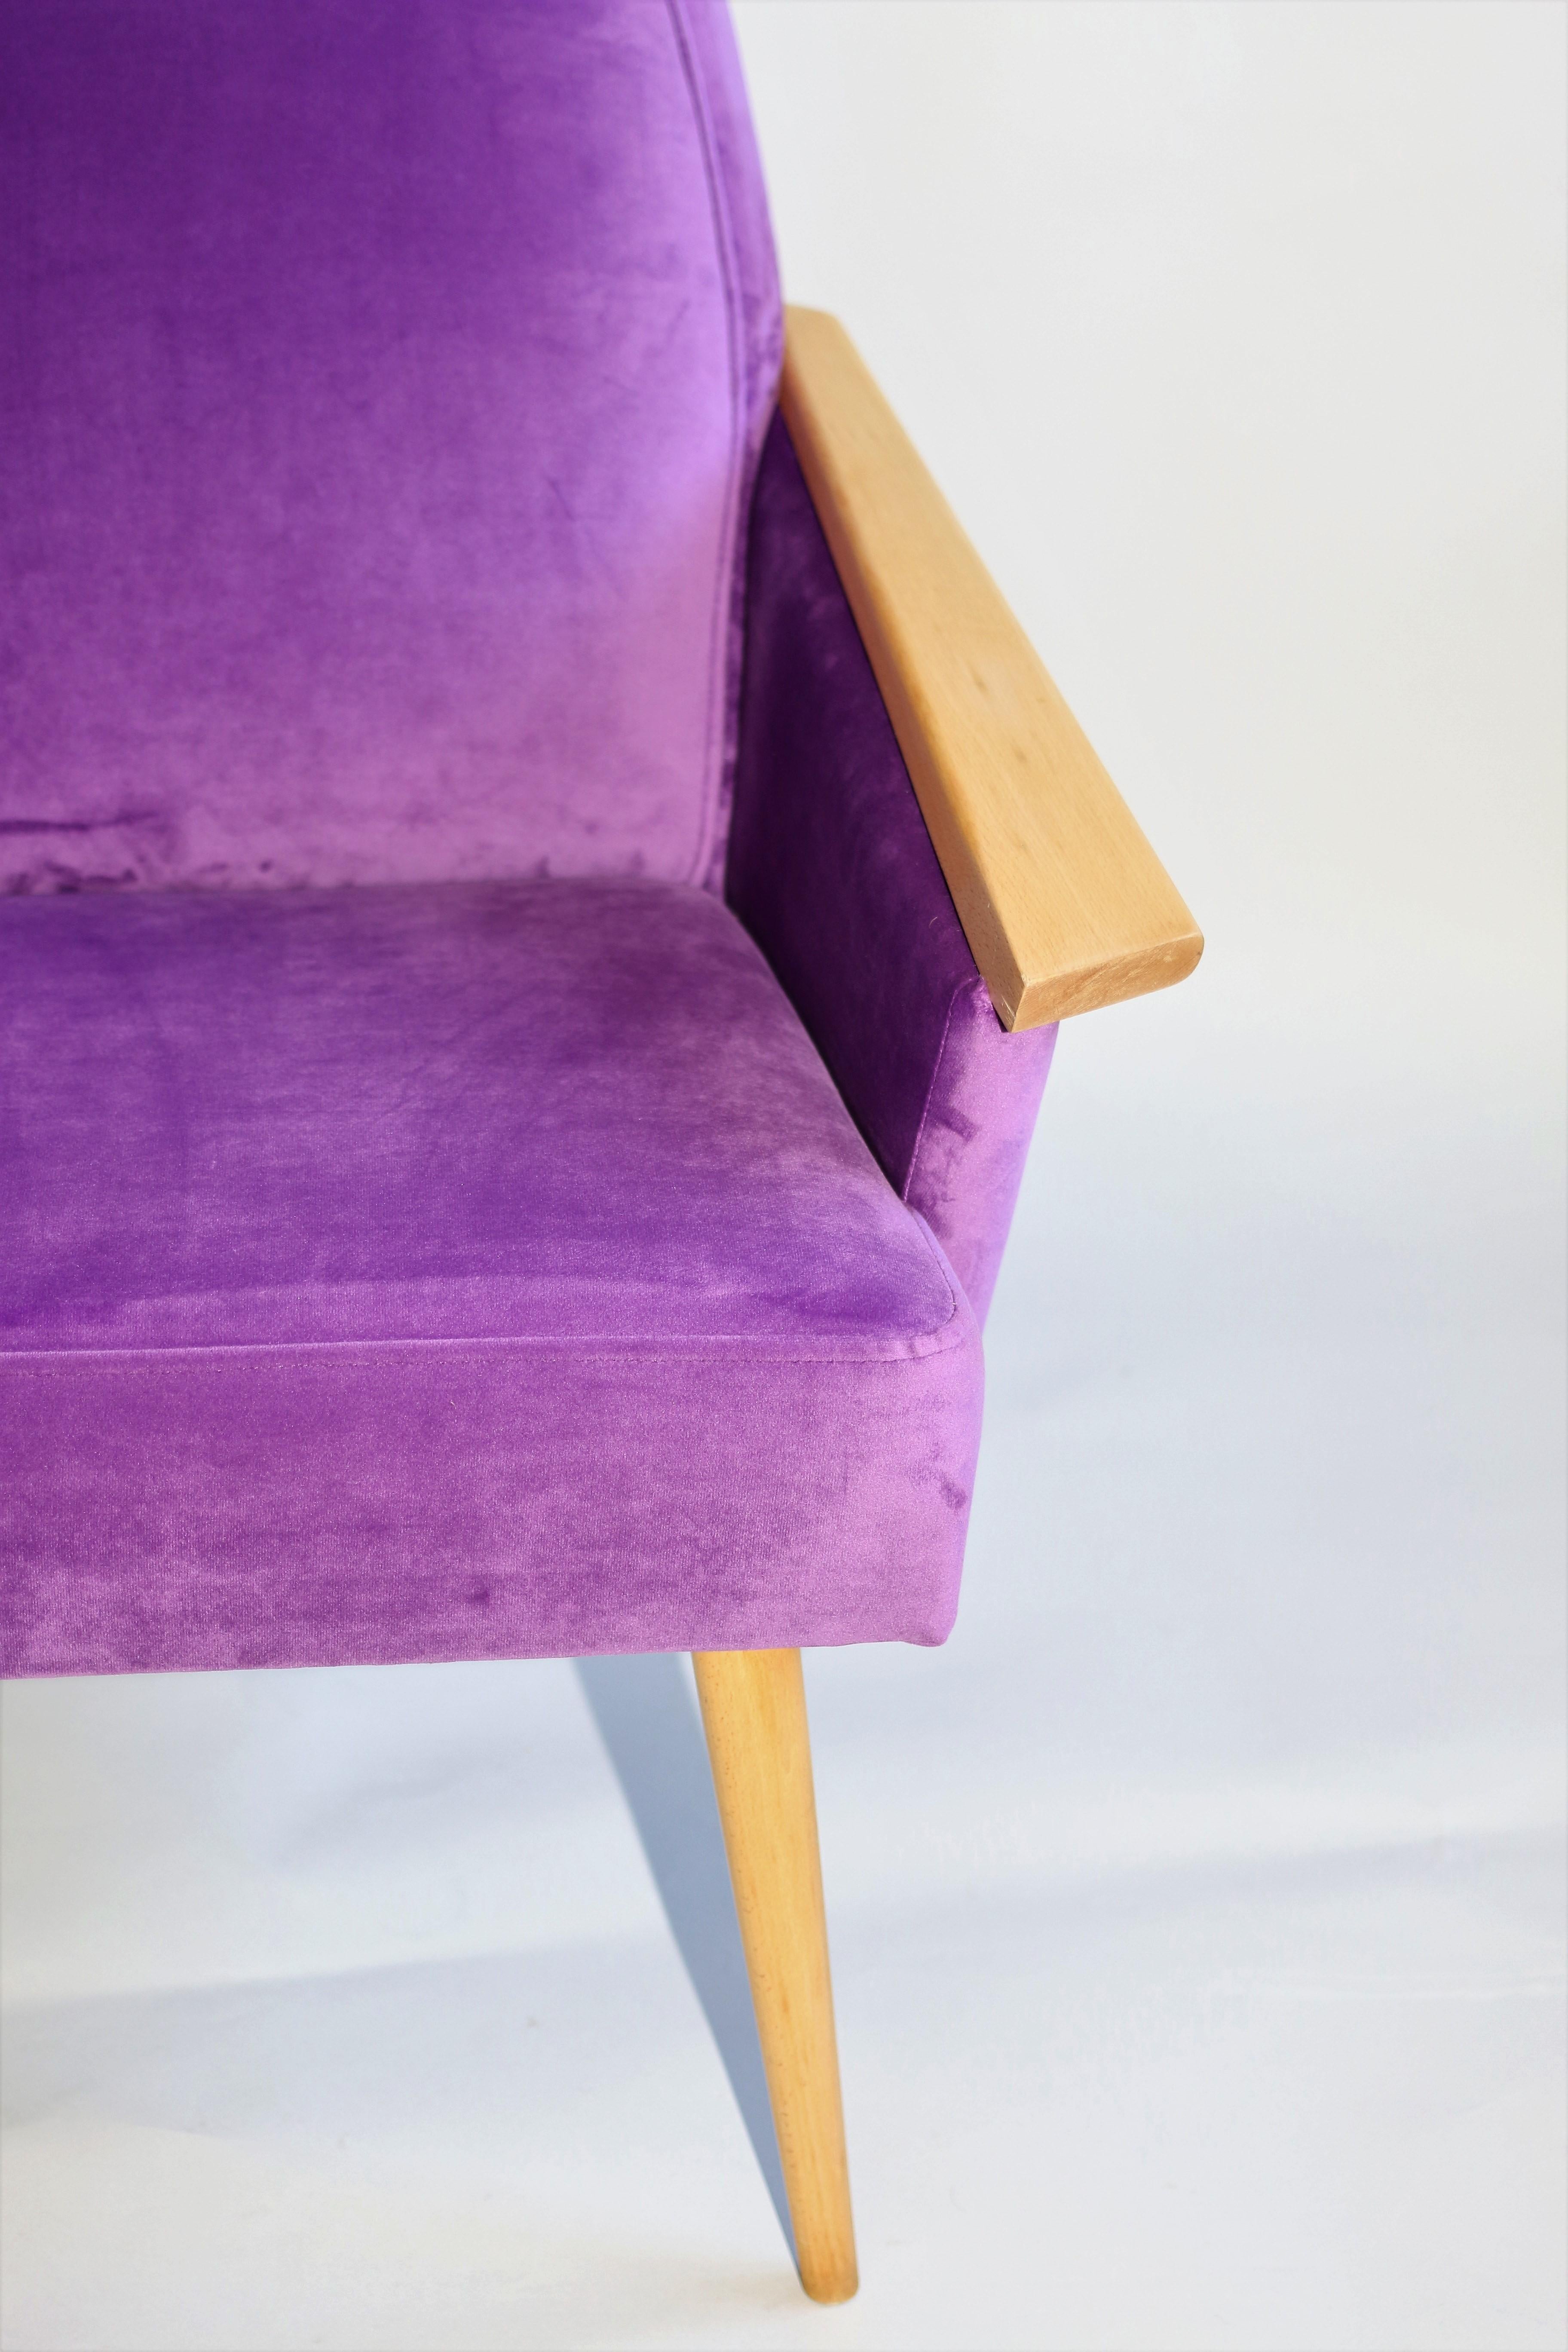 Restored polish club armchair in purple velvet from 1970s, new upholstery covered with velvet fabric in fashionable purple color, finished with wooden chair cushion. Wooden elements in natural wood color and beech tree. Perfect